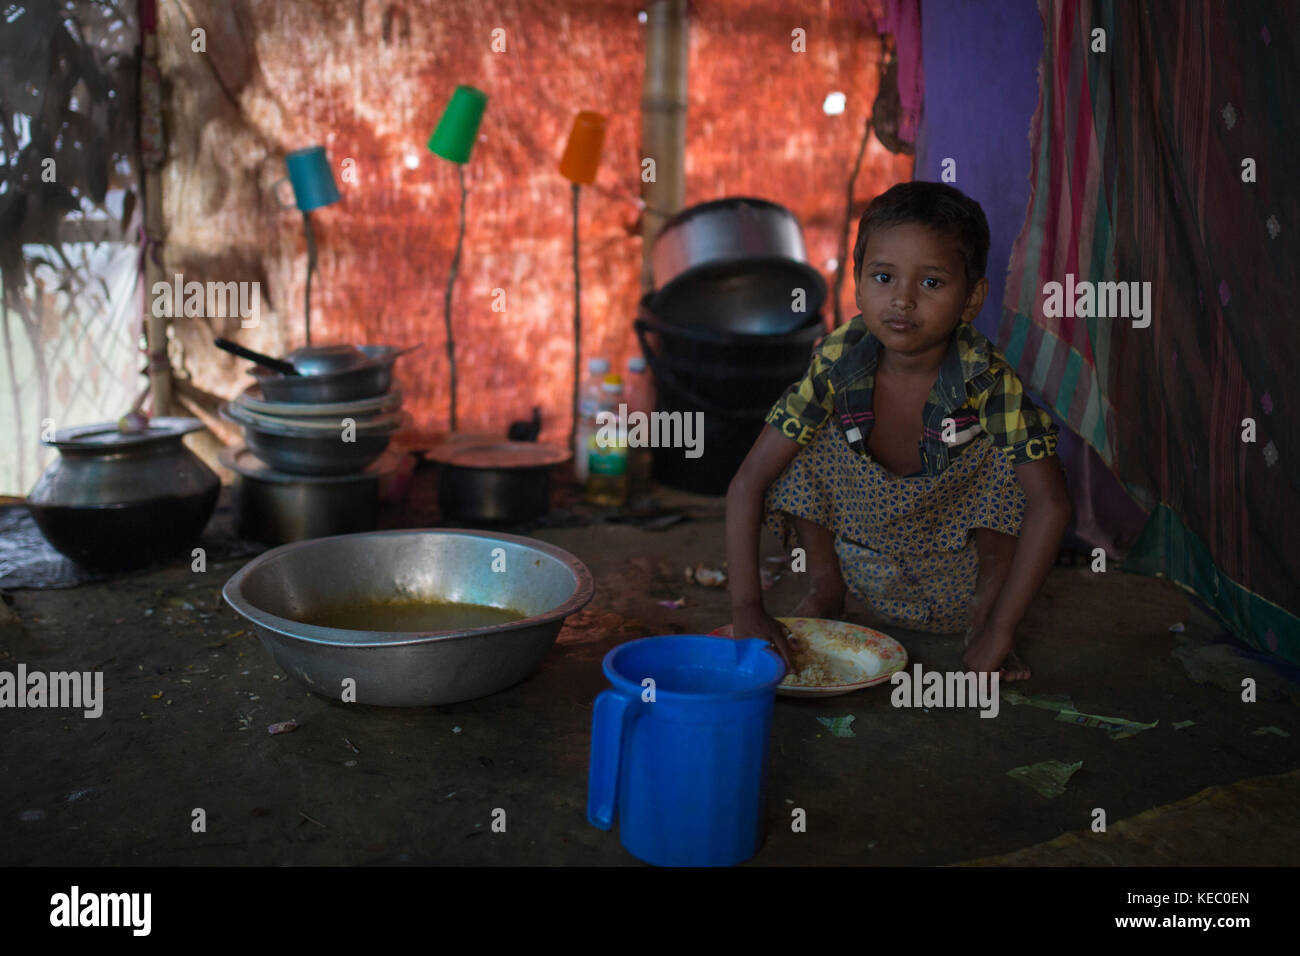 Cox's Bazar, Bangladesh. 19th Oct, 2017. A Rohingya child take meals at Balukhali refugee camp in Cox's Bazar, Bangladesh on October 19, 2017.  Almost 600,000 Rohingya refugees have reached Bangladesh since August, fleeing violence in Myanmar's Rakhine state, where the UN has accused troops of waging an ethnic cleansing campaign against them. Credit: zakir hossain chowdhury zakir/Alamy Live News Stock Photo